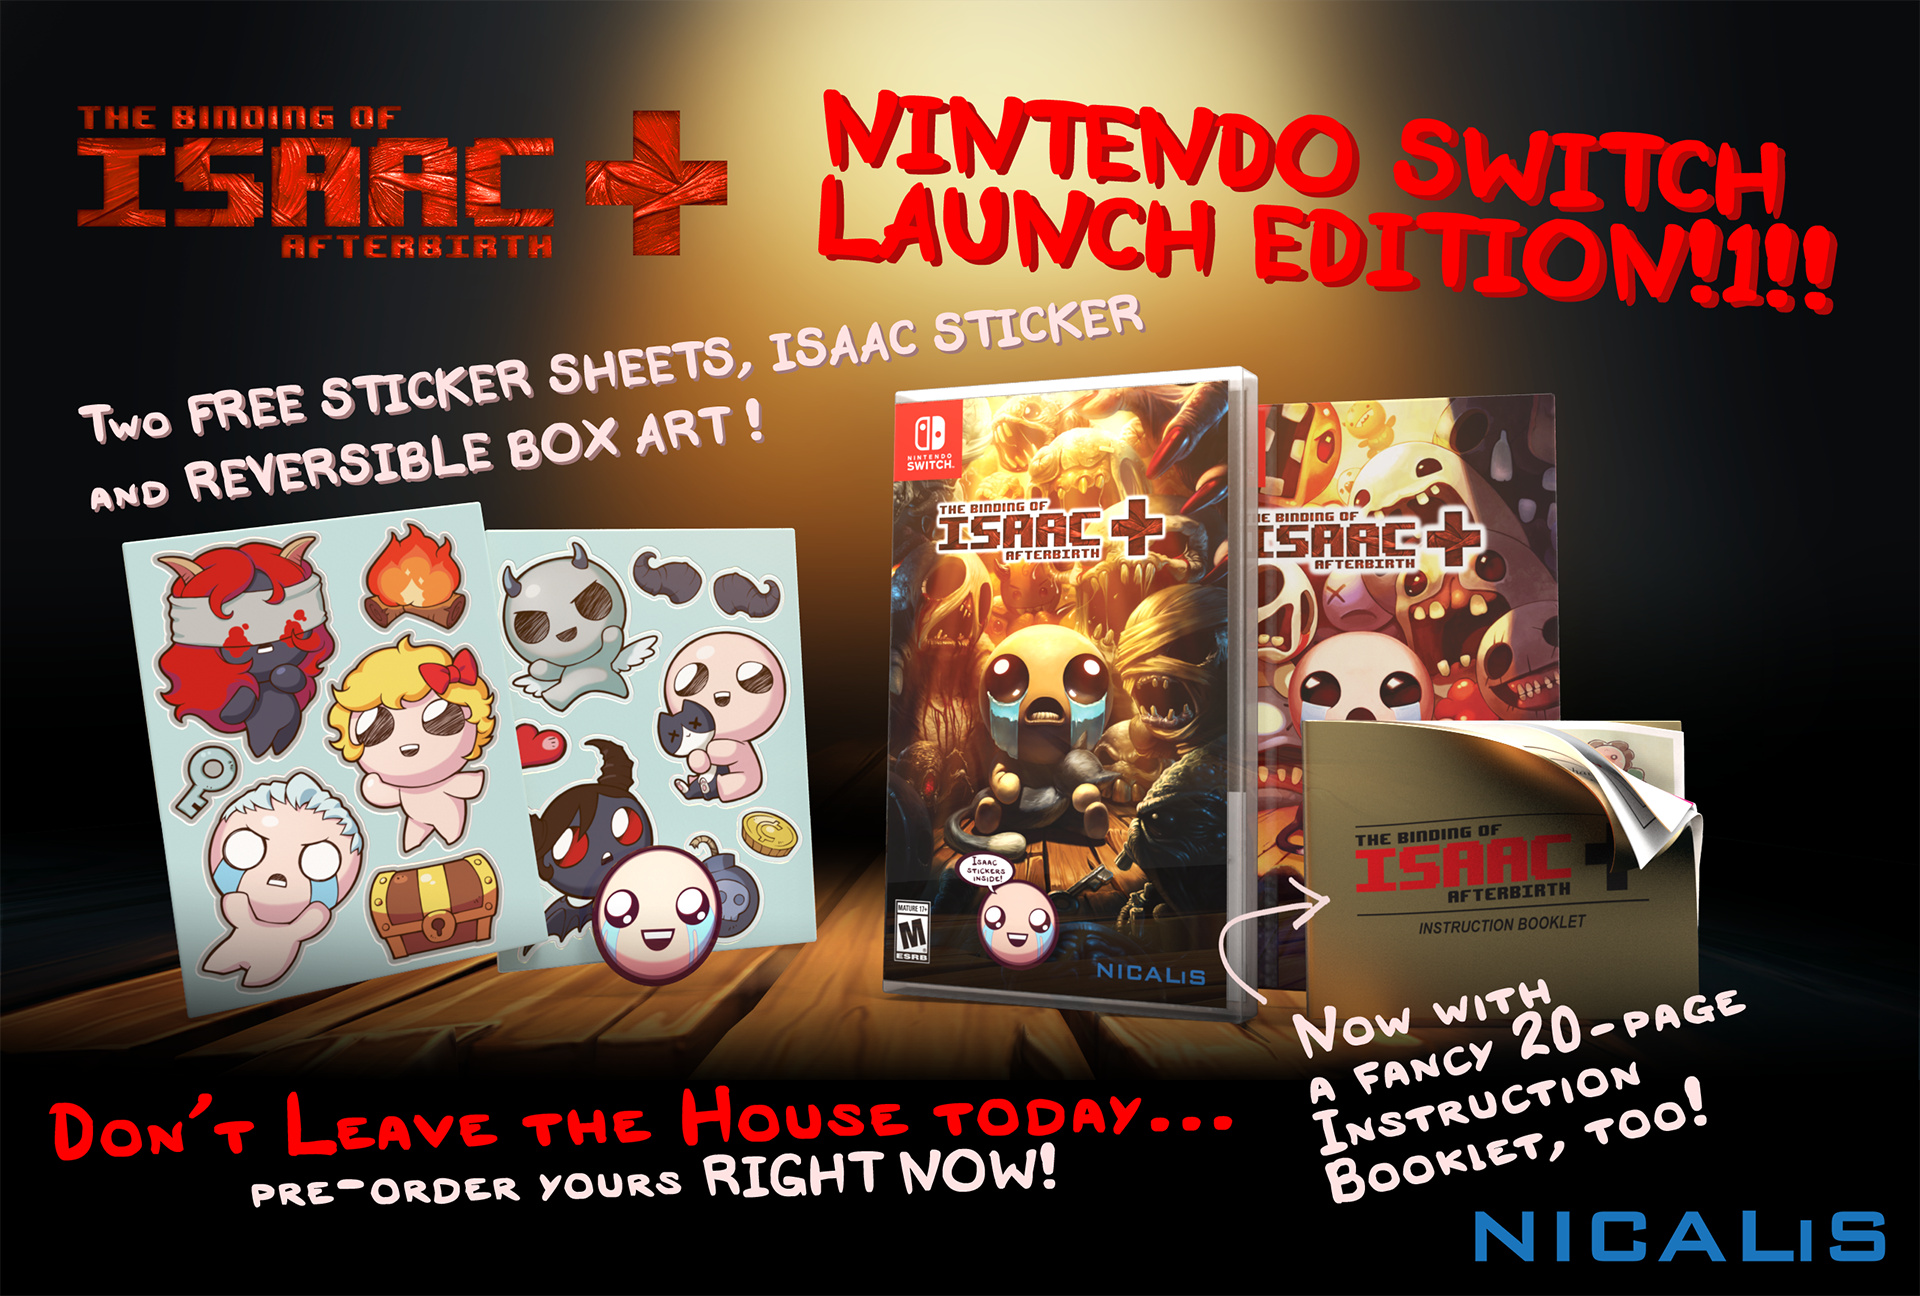 The Binding of Isaac Afterbirth Launch Edition Cover Art